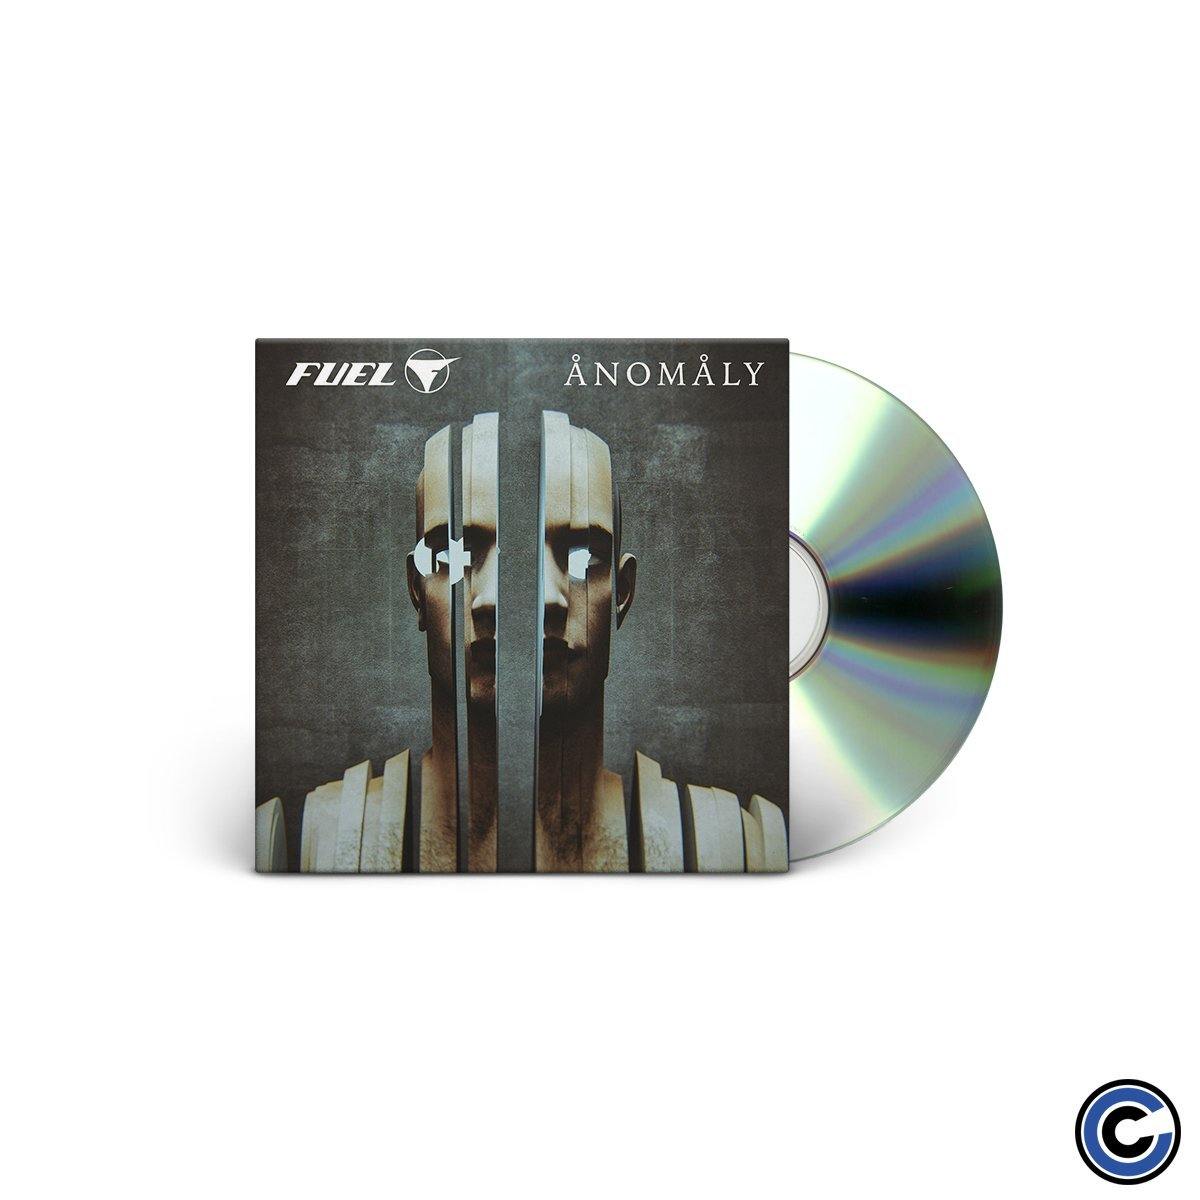 Buy – Fuel "Anomaly" Signed CD – Band & Music Merch – Cold Cuts Merch